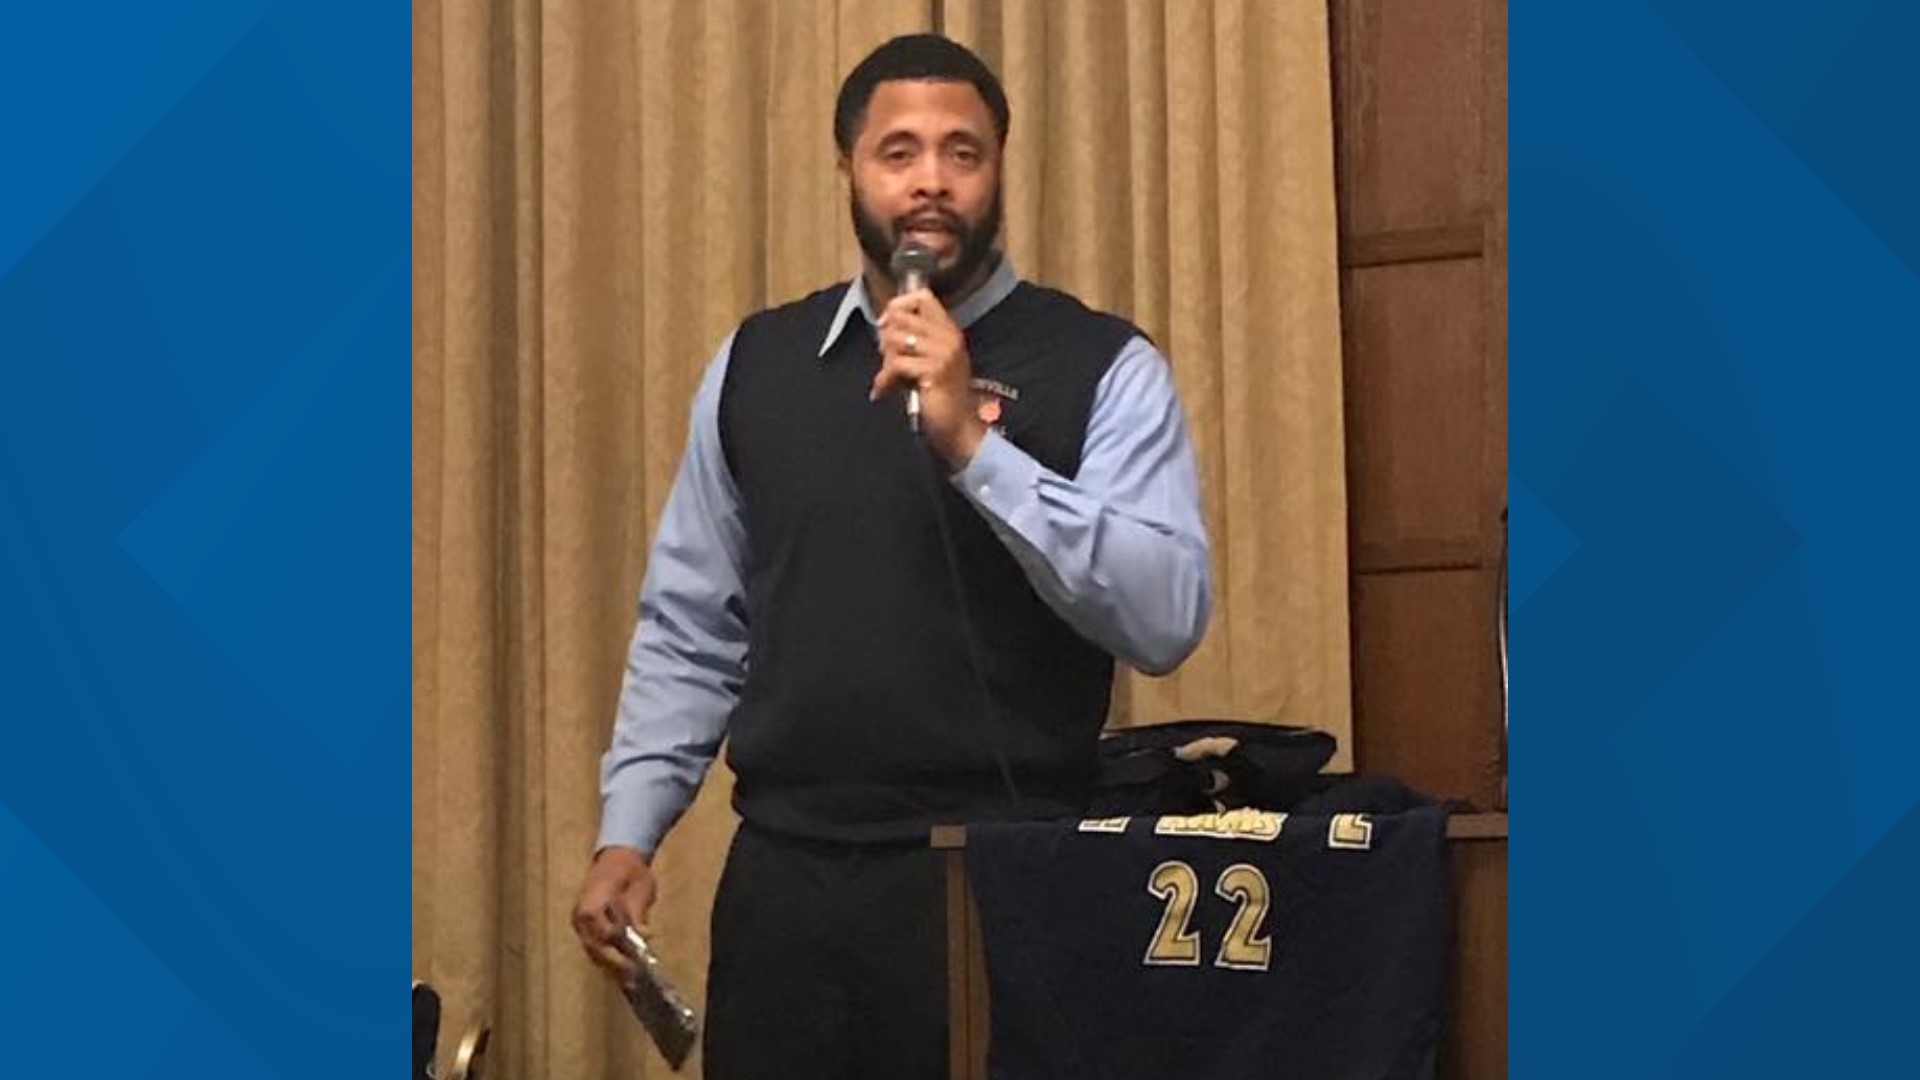 The Reidsville community is devastated, after Reidsville High School's basketball coach Curtis Pass died suddenly. Several students and staff gathered at the school Friday to remember the former, student and basketball player.